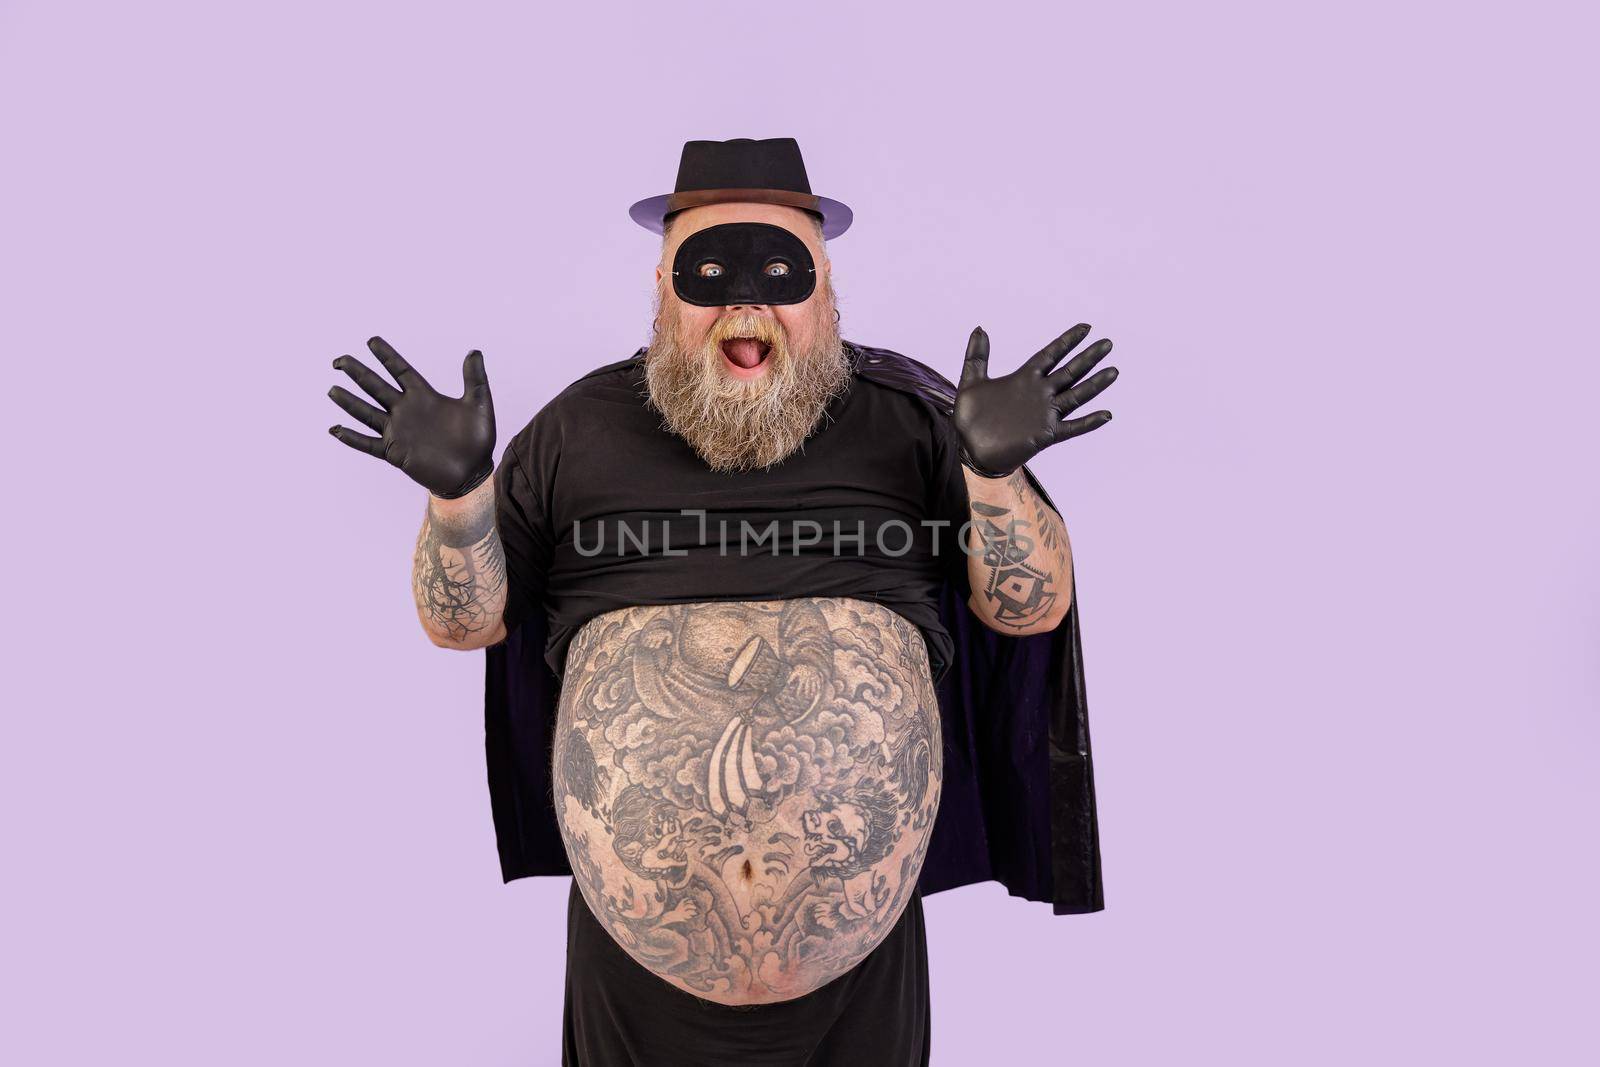 Excited mature male person with overweight wearing hero suit with cape and mask throws up hands standing on purple background in studio